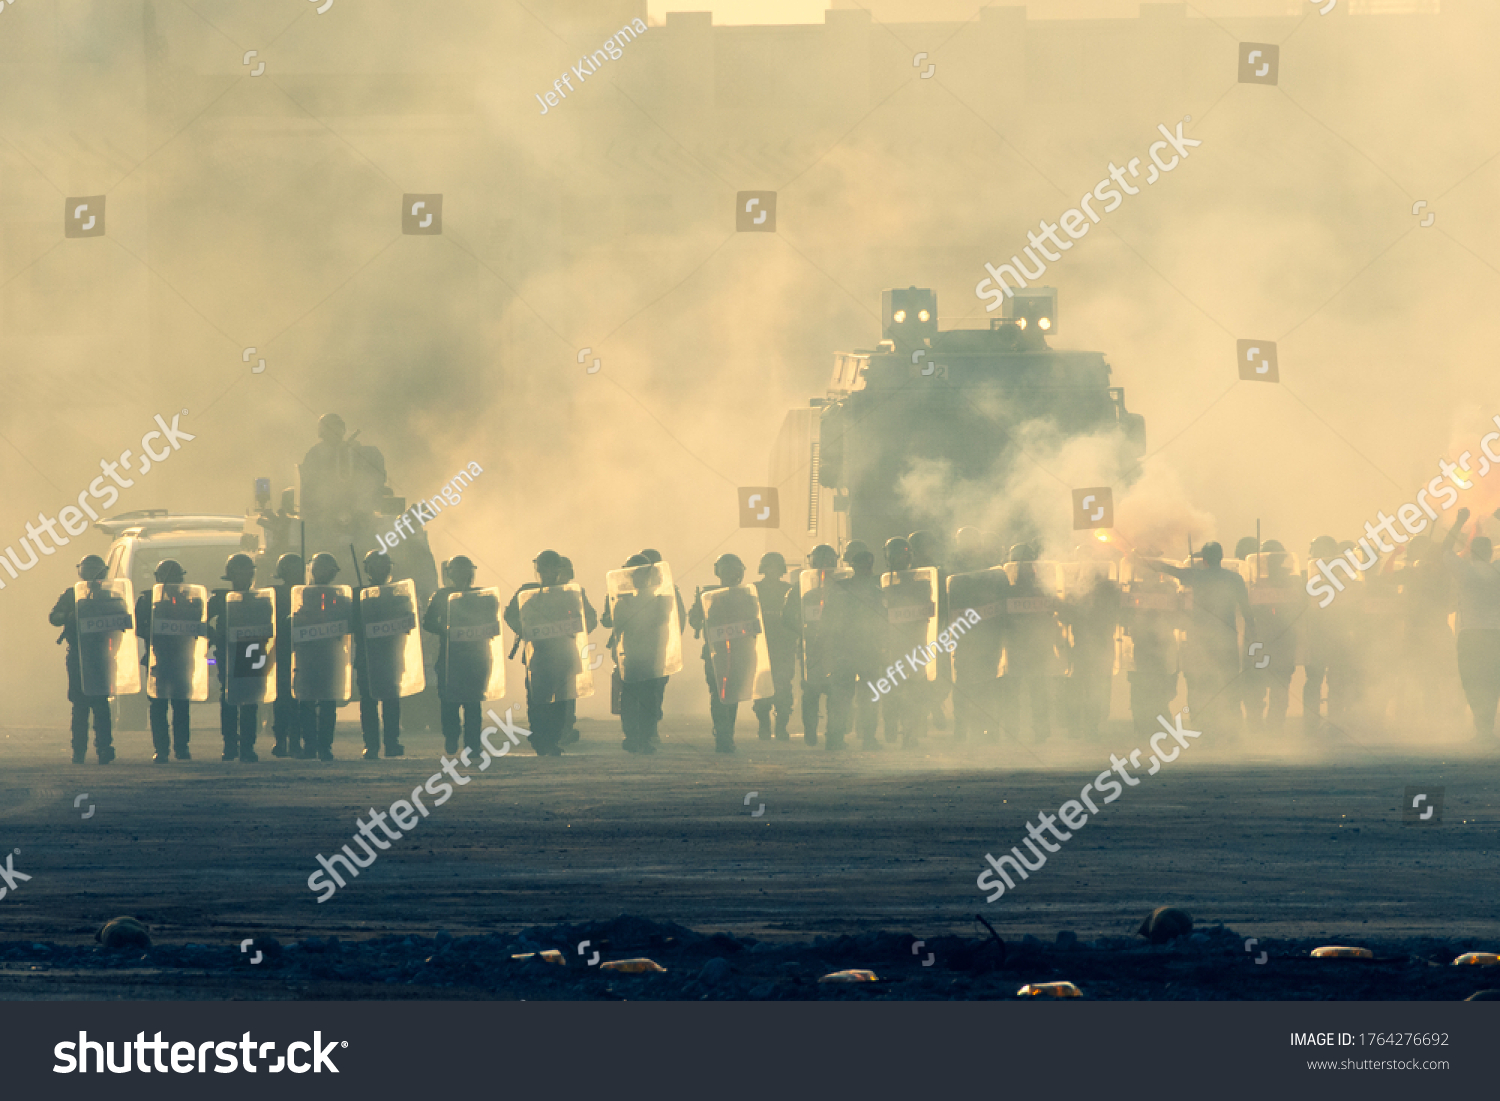 Military police riot response to a protest with tear gas, smoke, fire, explosions. Political expression, riot, protest, demostration and military concept. #1764276692